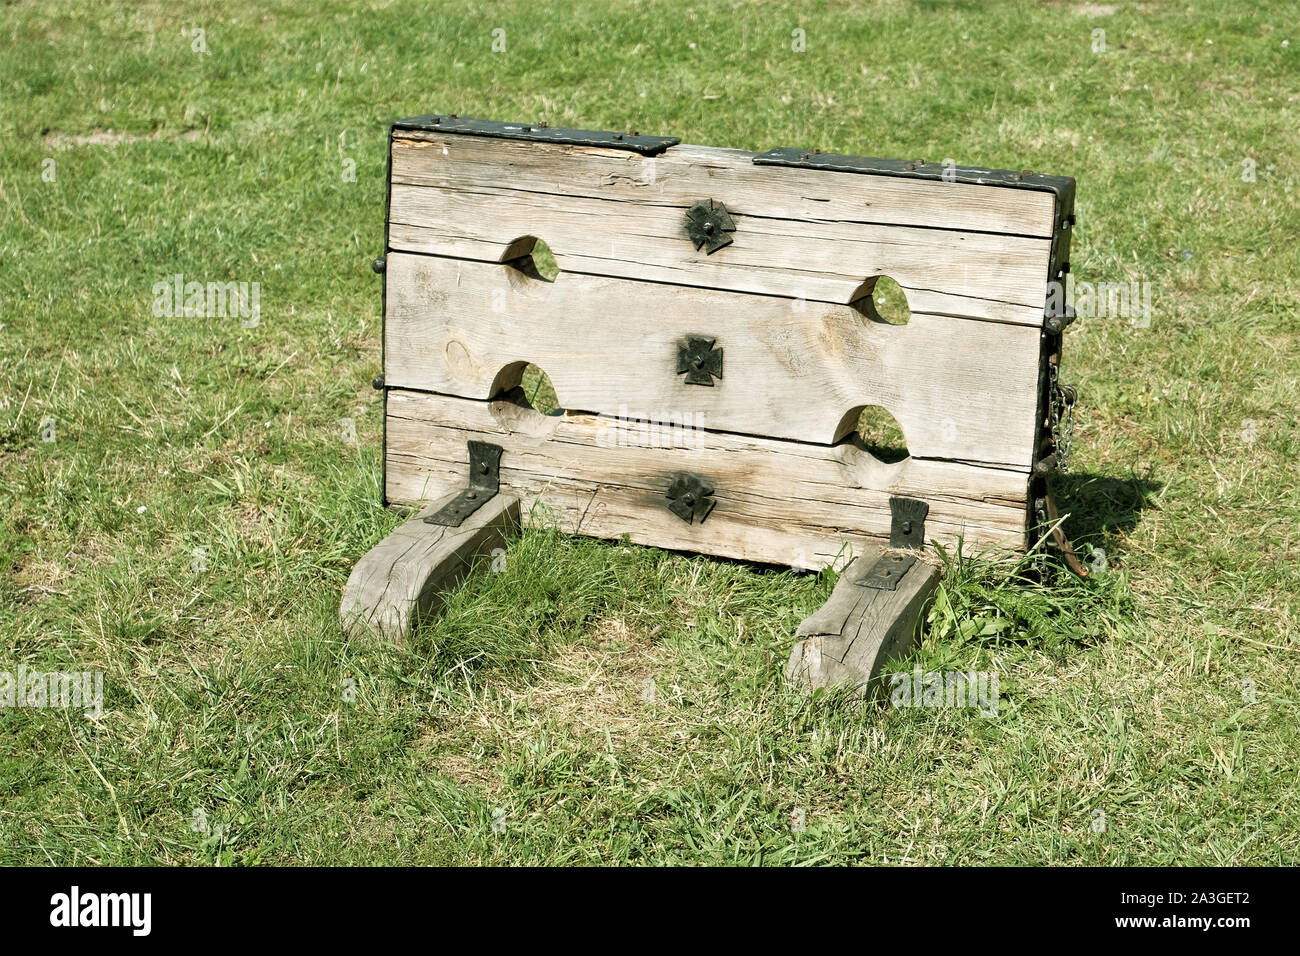 old wooden stocks  used for punishing offenders in the middle ages Stock Photo